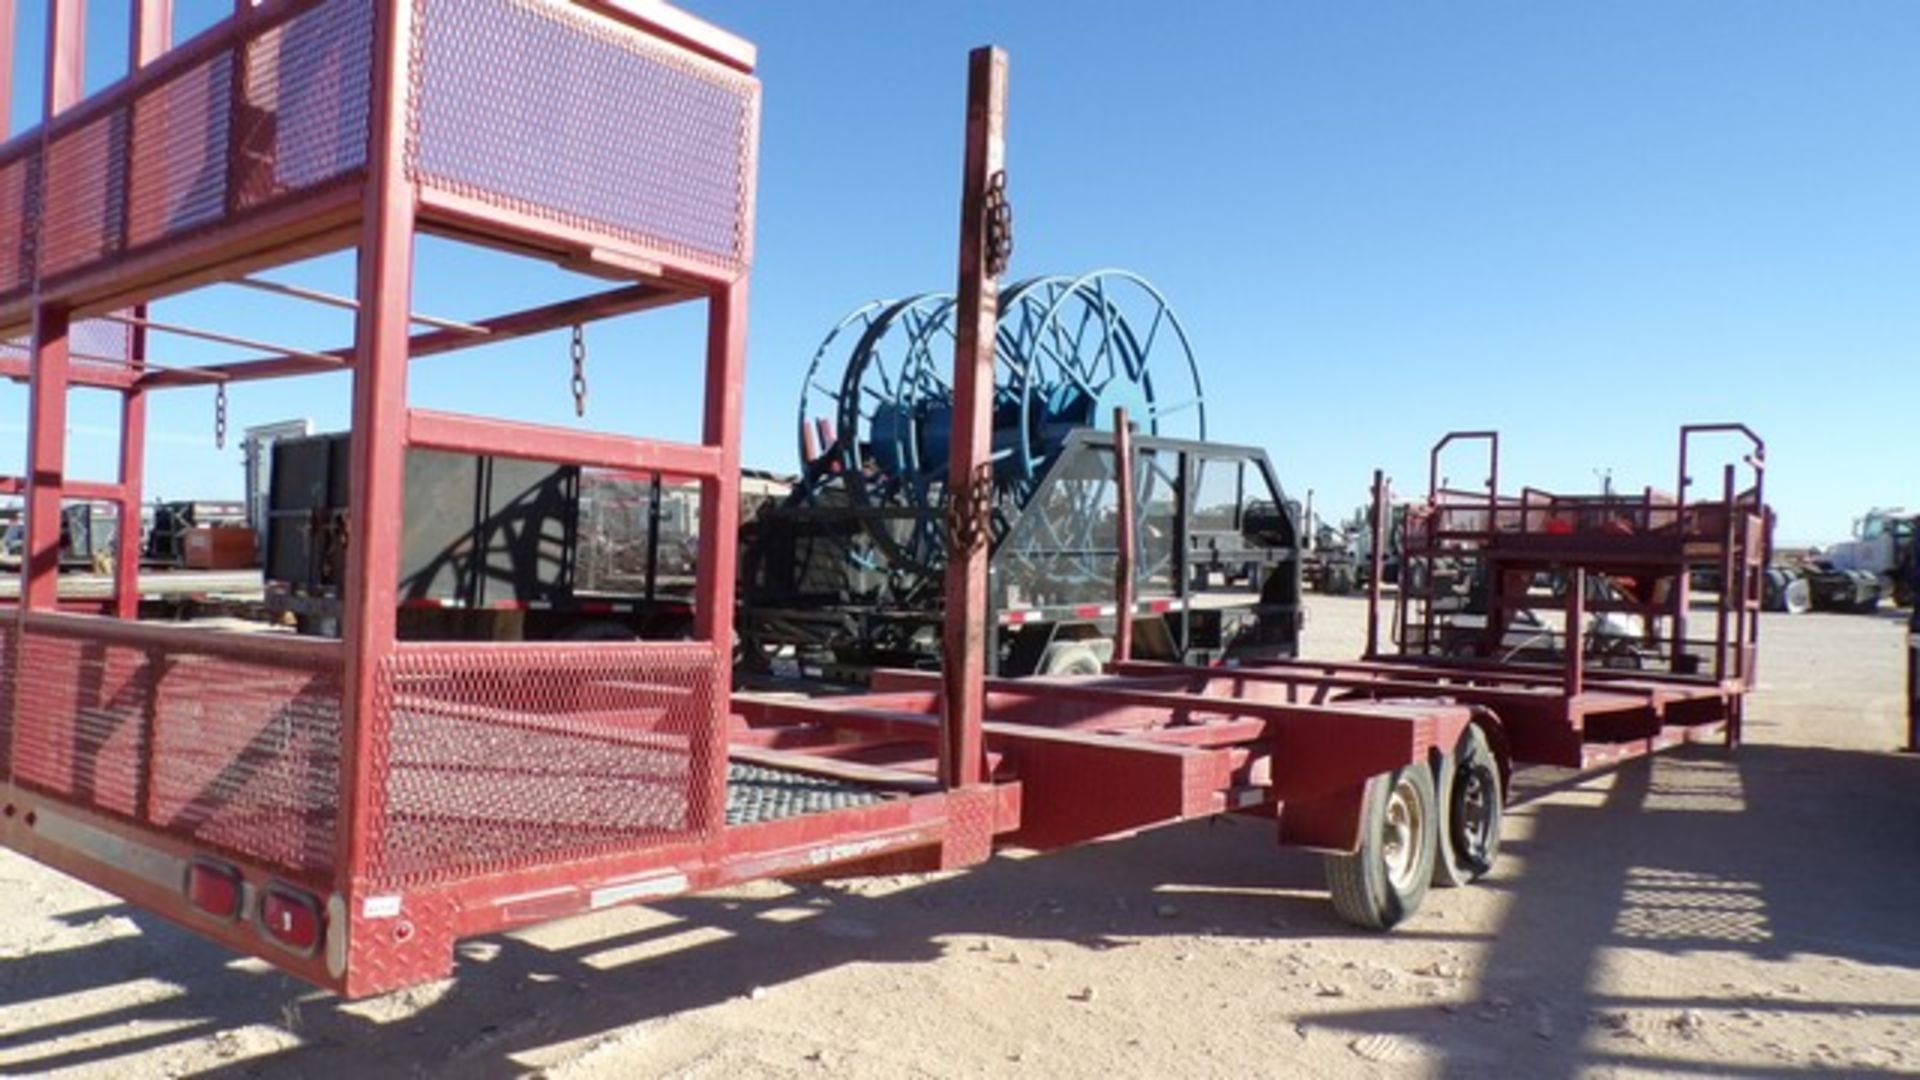 Located in YARD 1 - Midland, TX (6326) 2001 ORTEG ENERGY T/A GN PIPE TRAILER, 8.6'W X 36'L, VIN- - Image 6 of 8